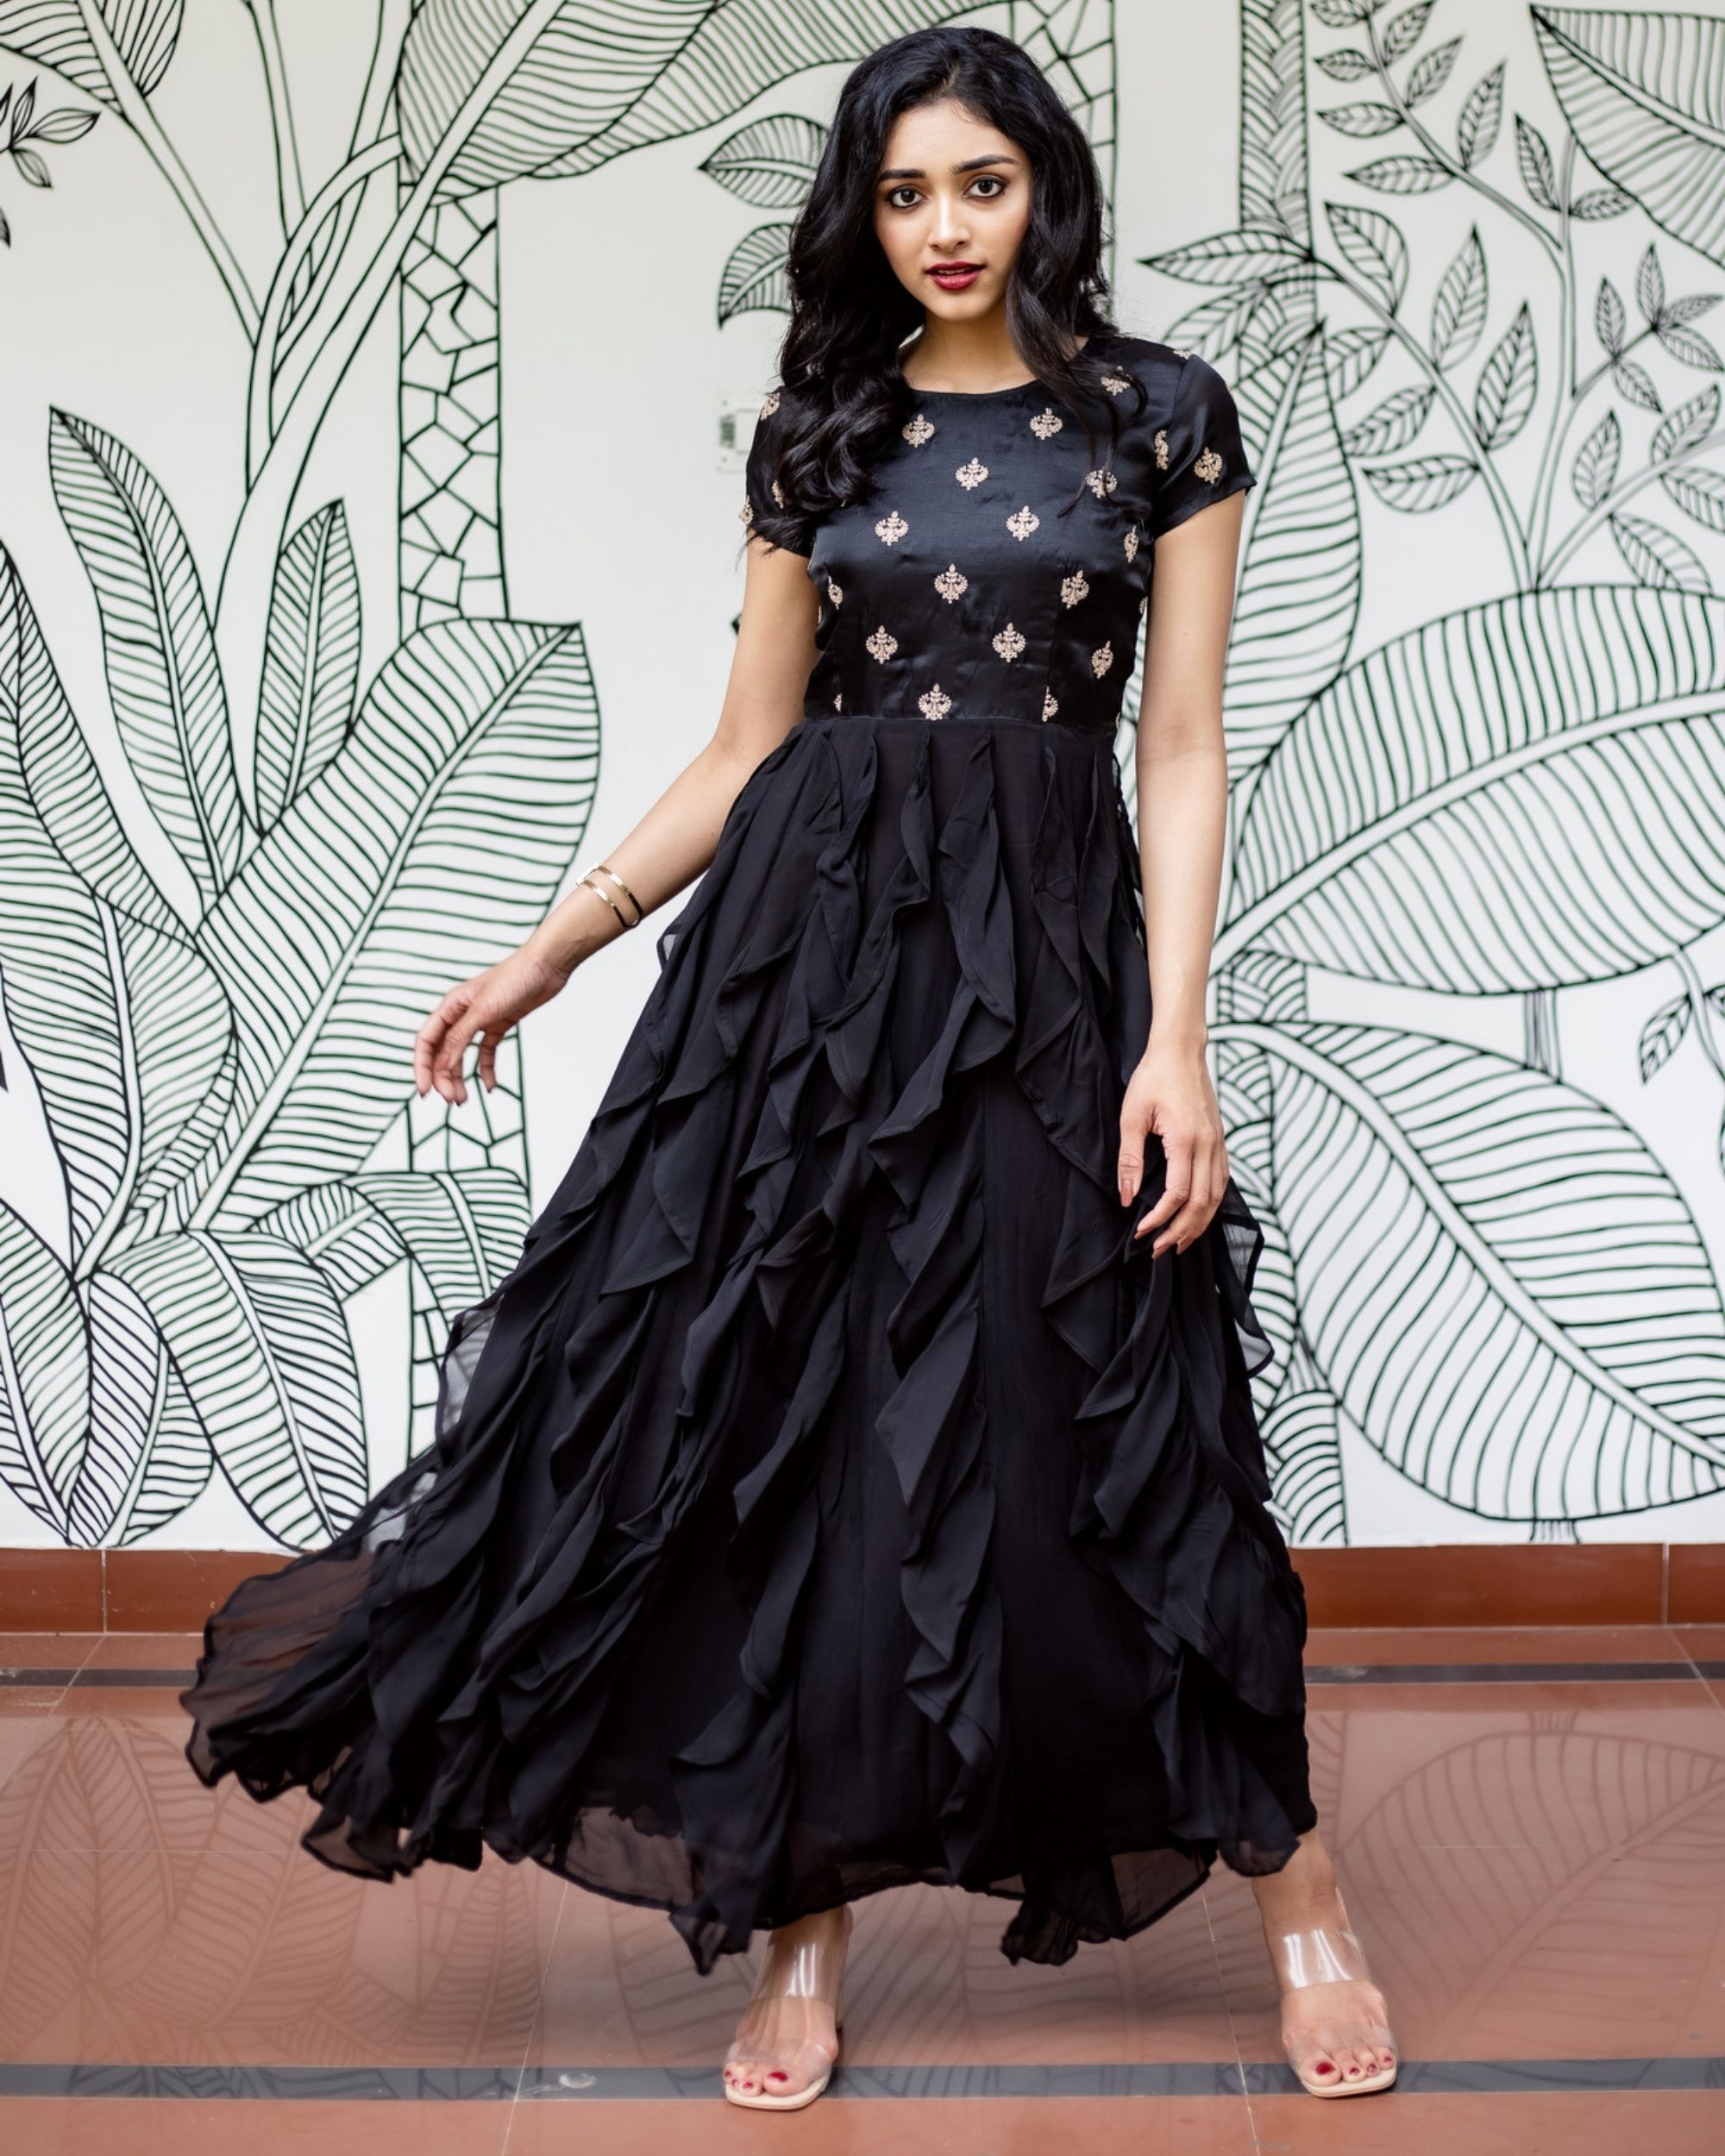 Black embroidered ruffled dress